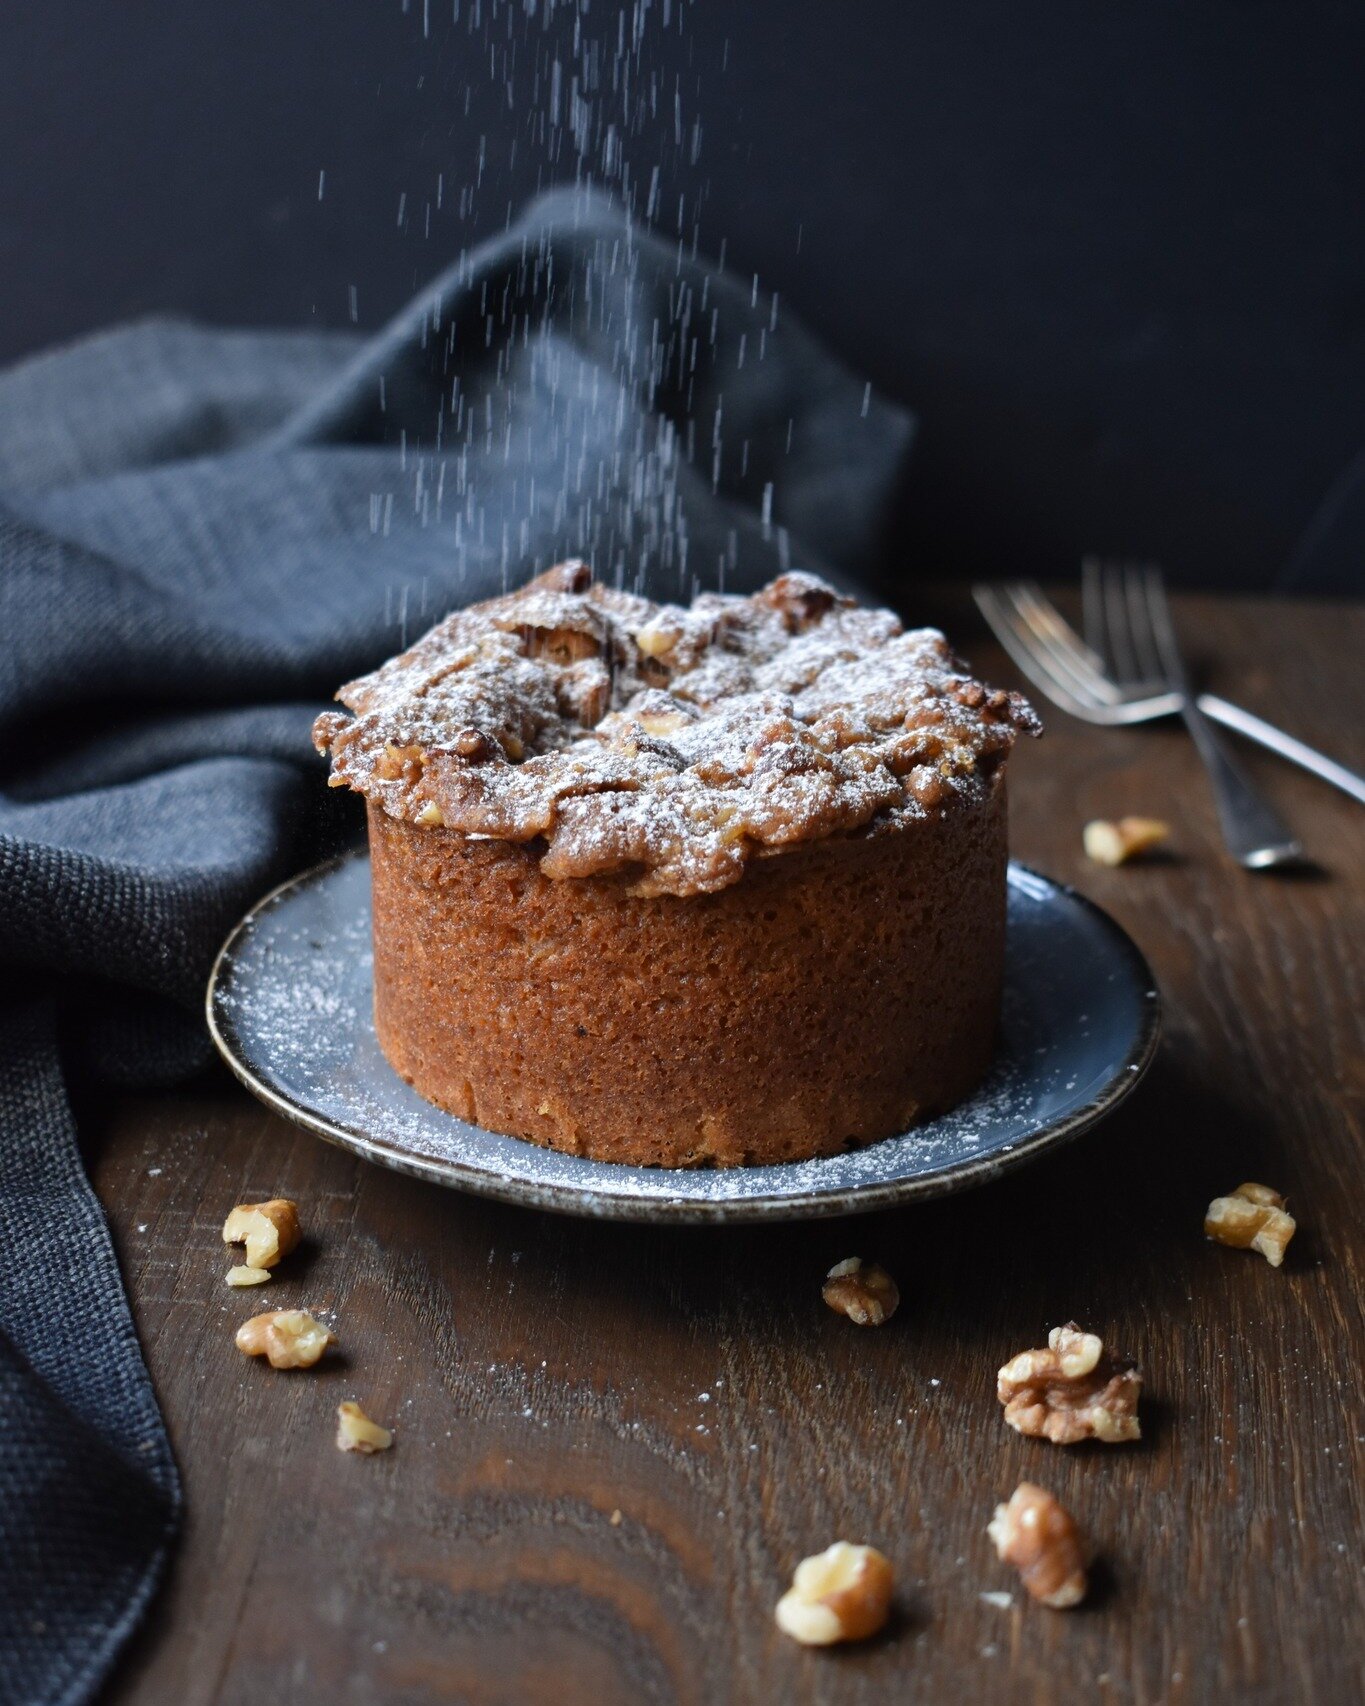 Delicious Feijoa Crumble Cake for your Friday 

@annabellangbein recipe 

#cake #baking #feijoa #crumble #foodphotography #foodstylist #foodphotographer #foodphoto